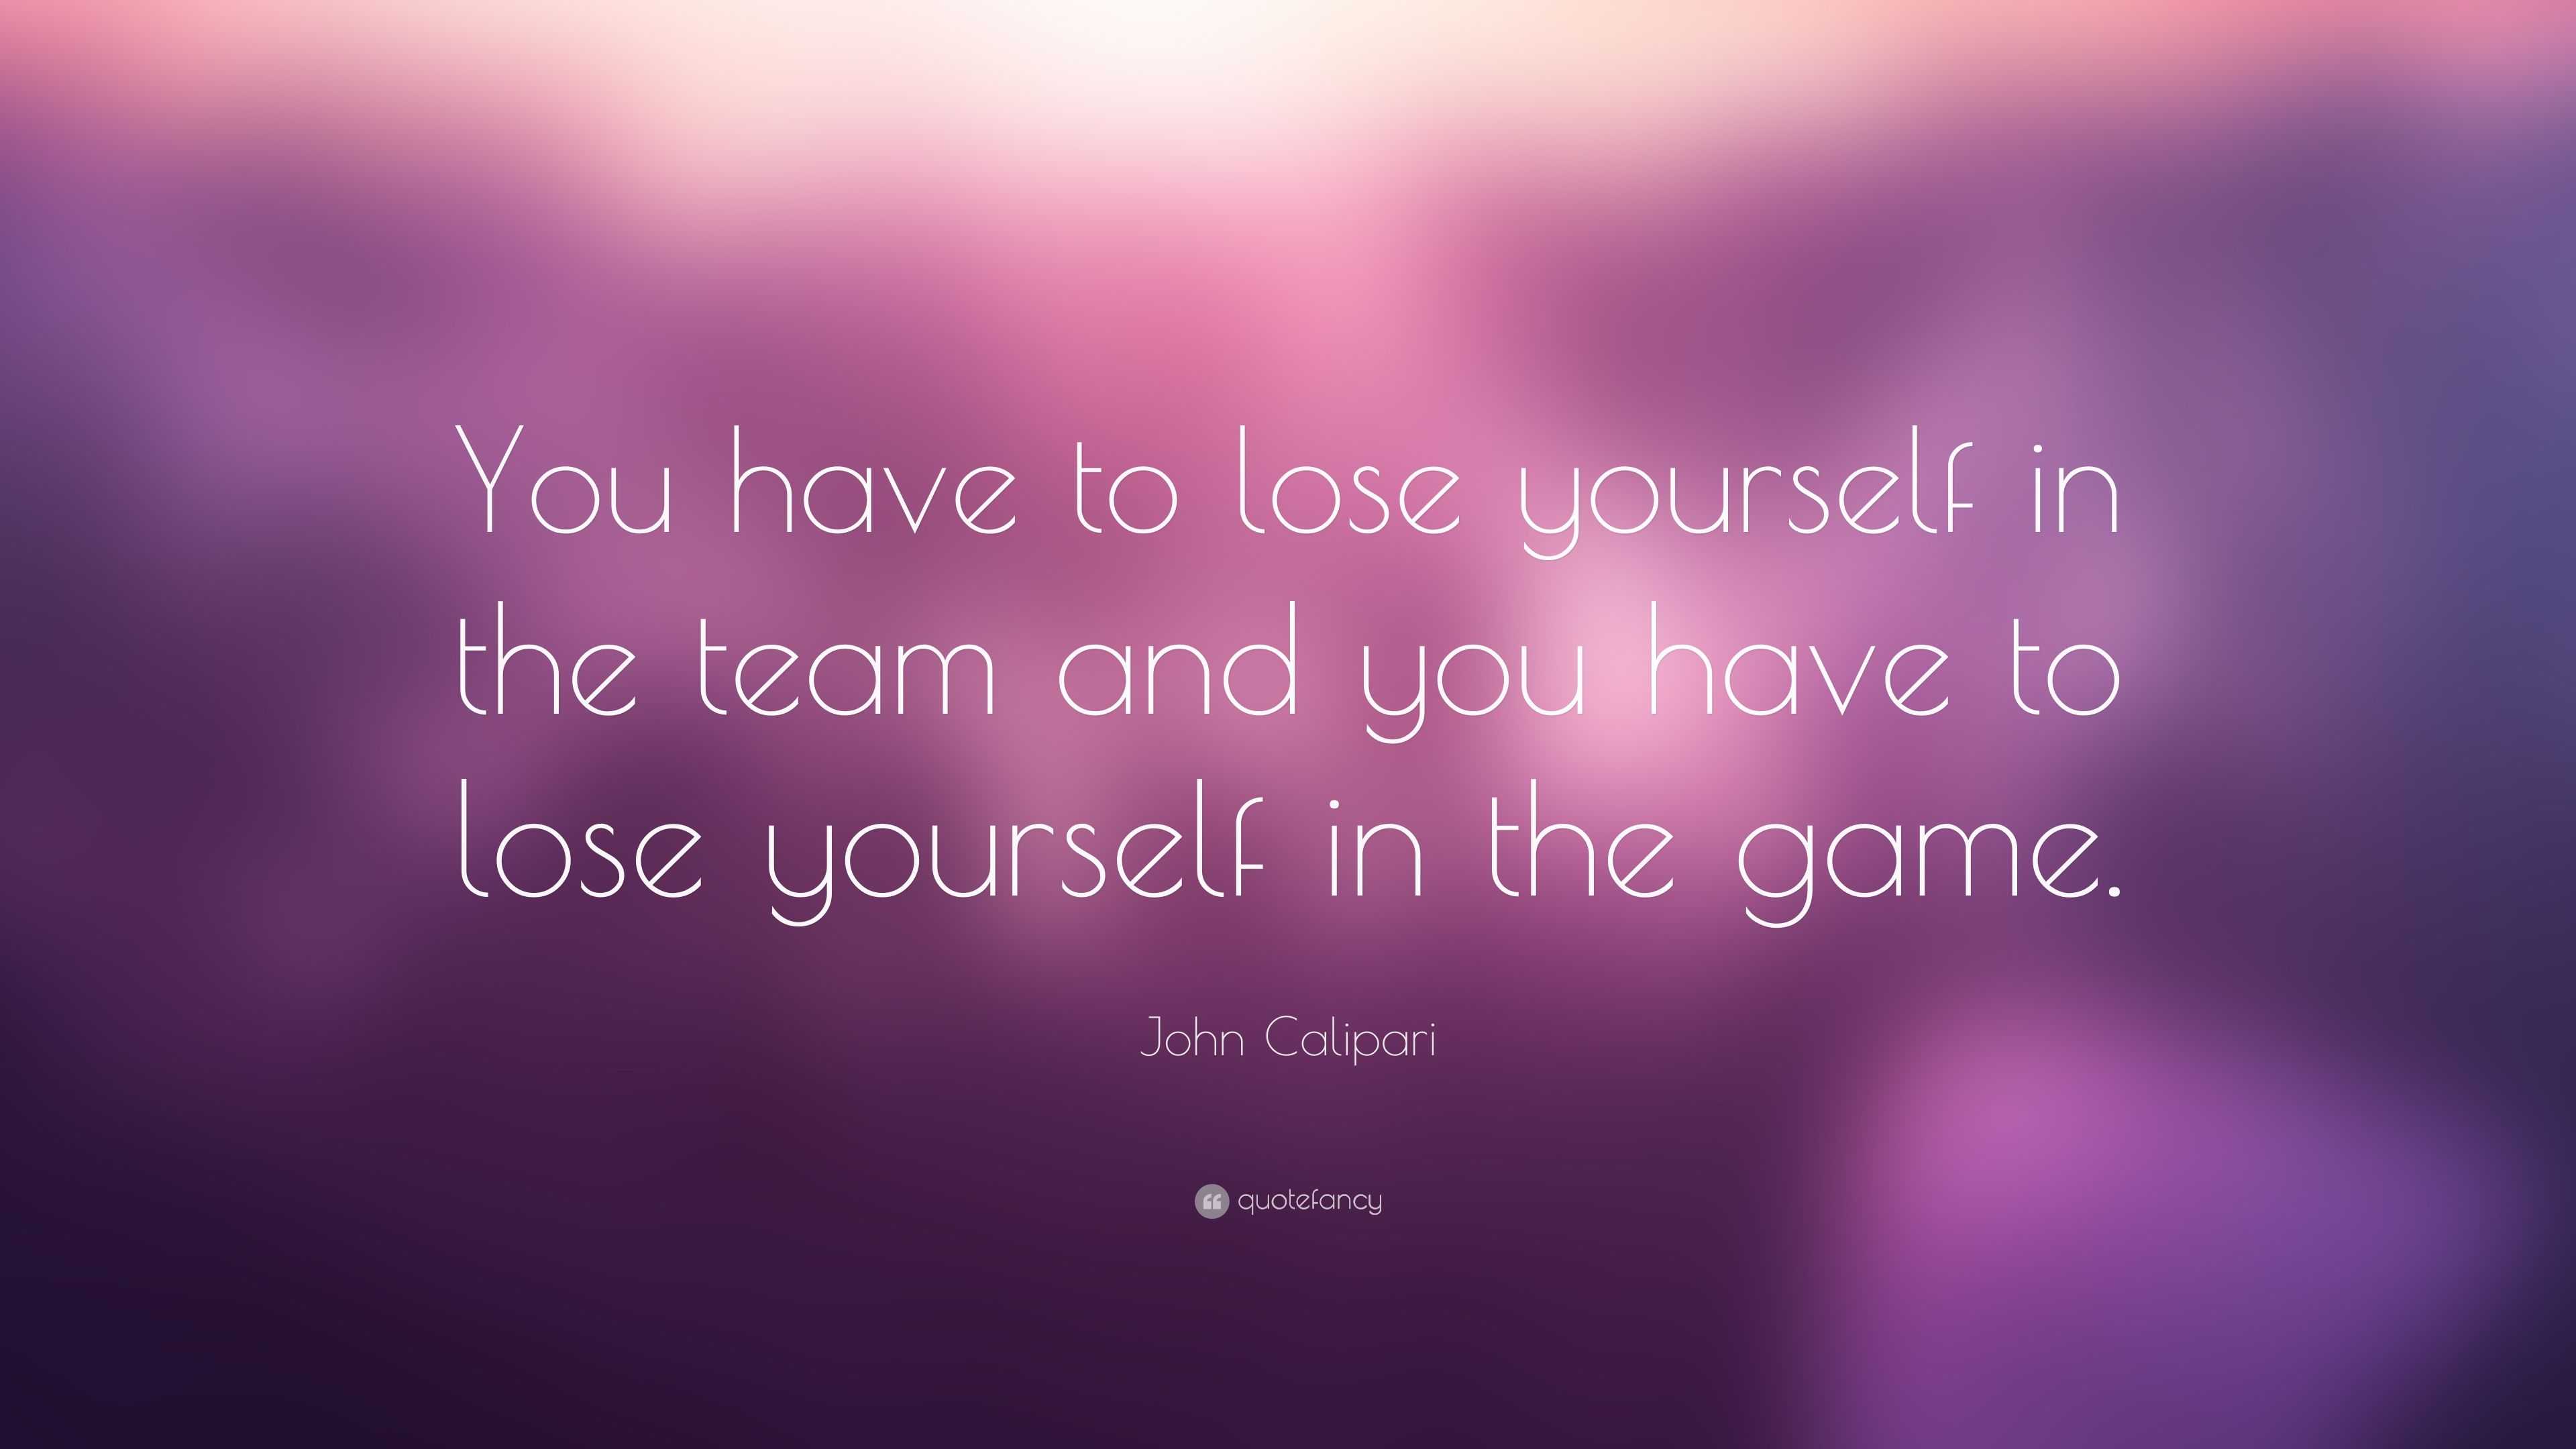 John Calipari Quote: “You have to lose yourself in the team and you ...